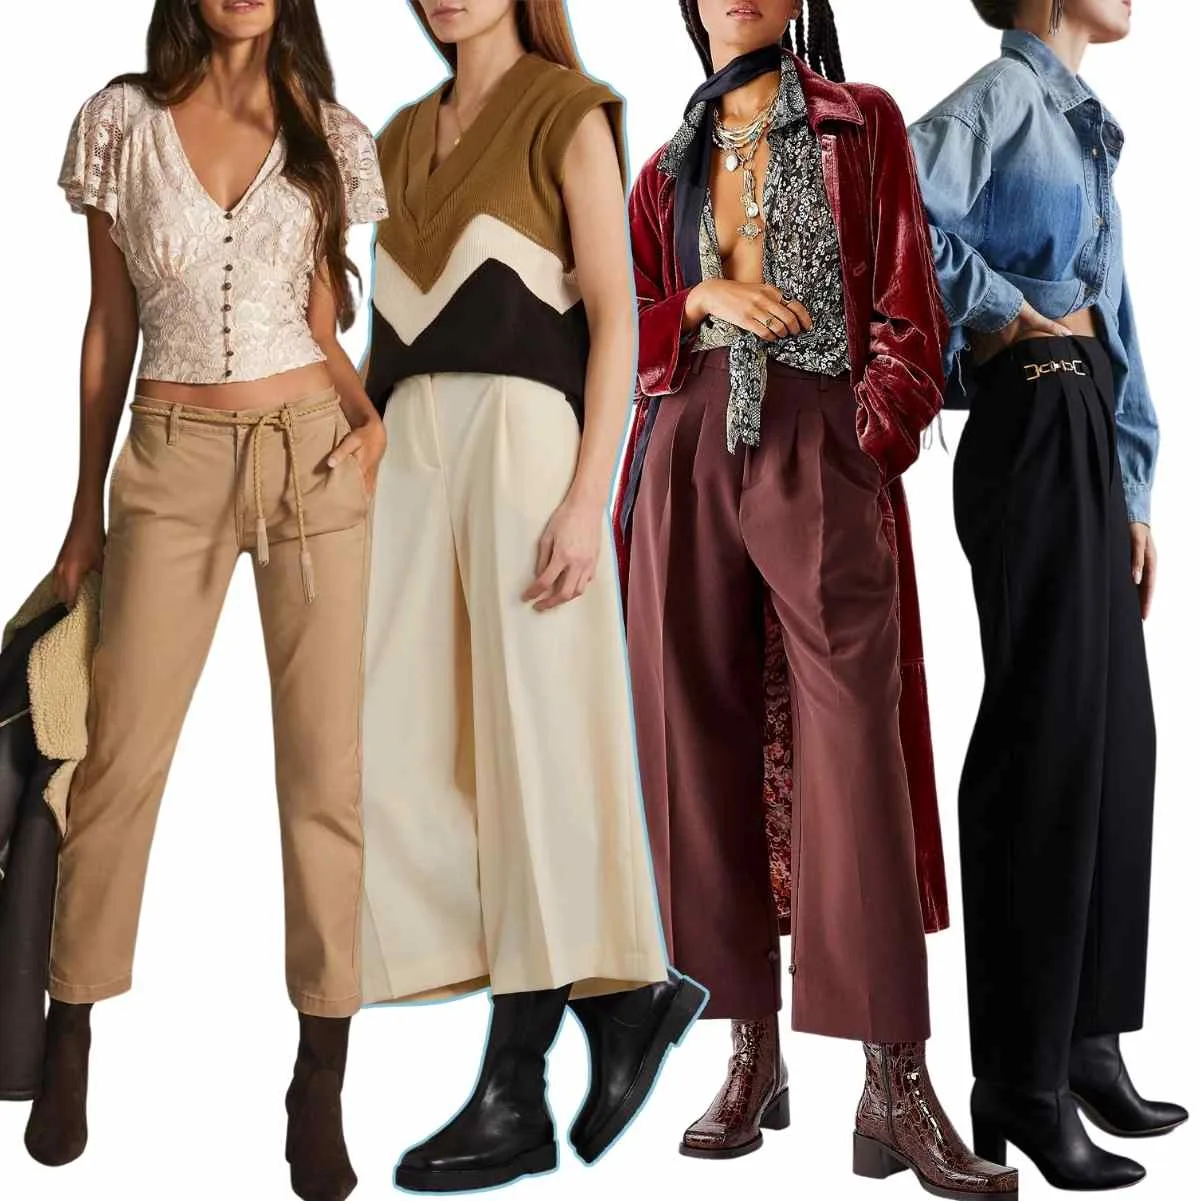 Collage of 4 women wearing cropped dress pants with knee high boots.